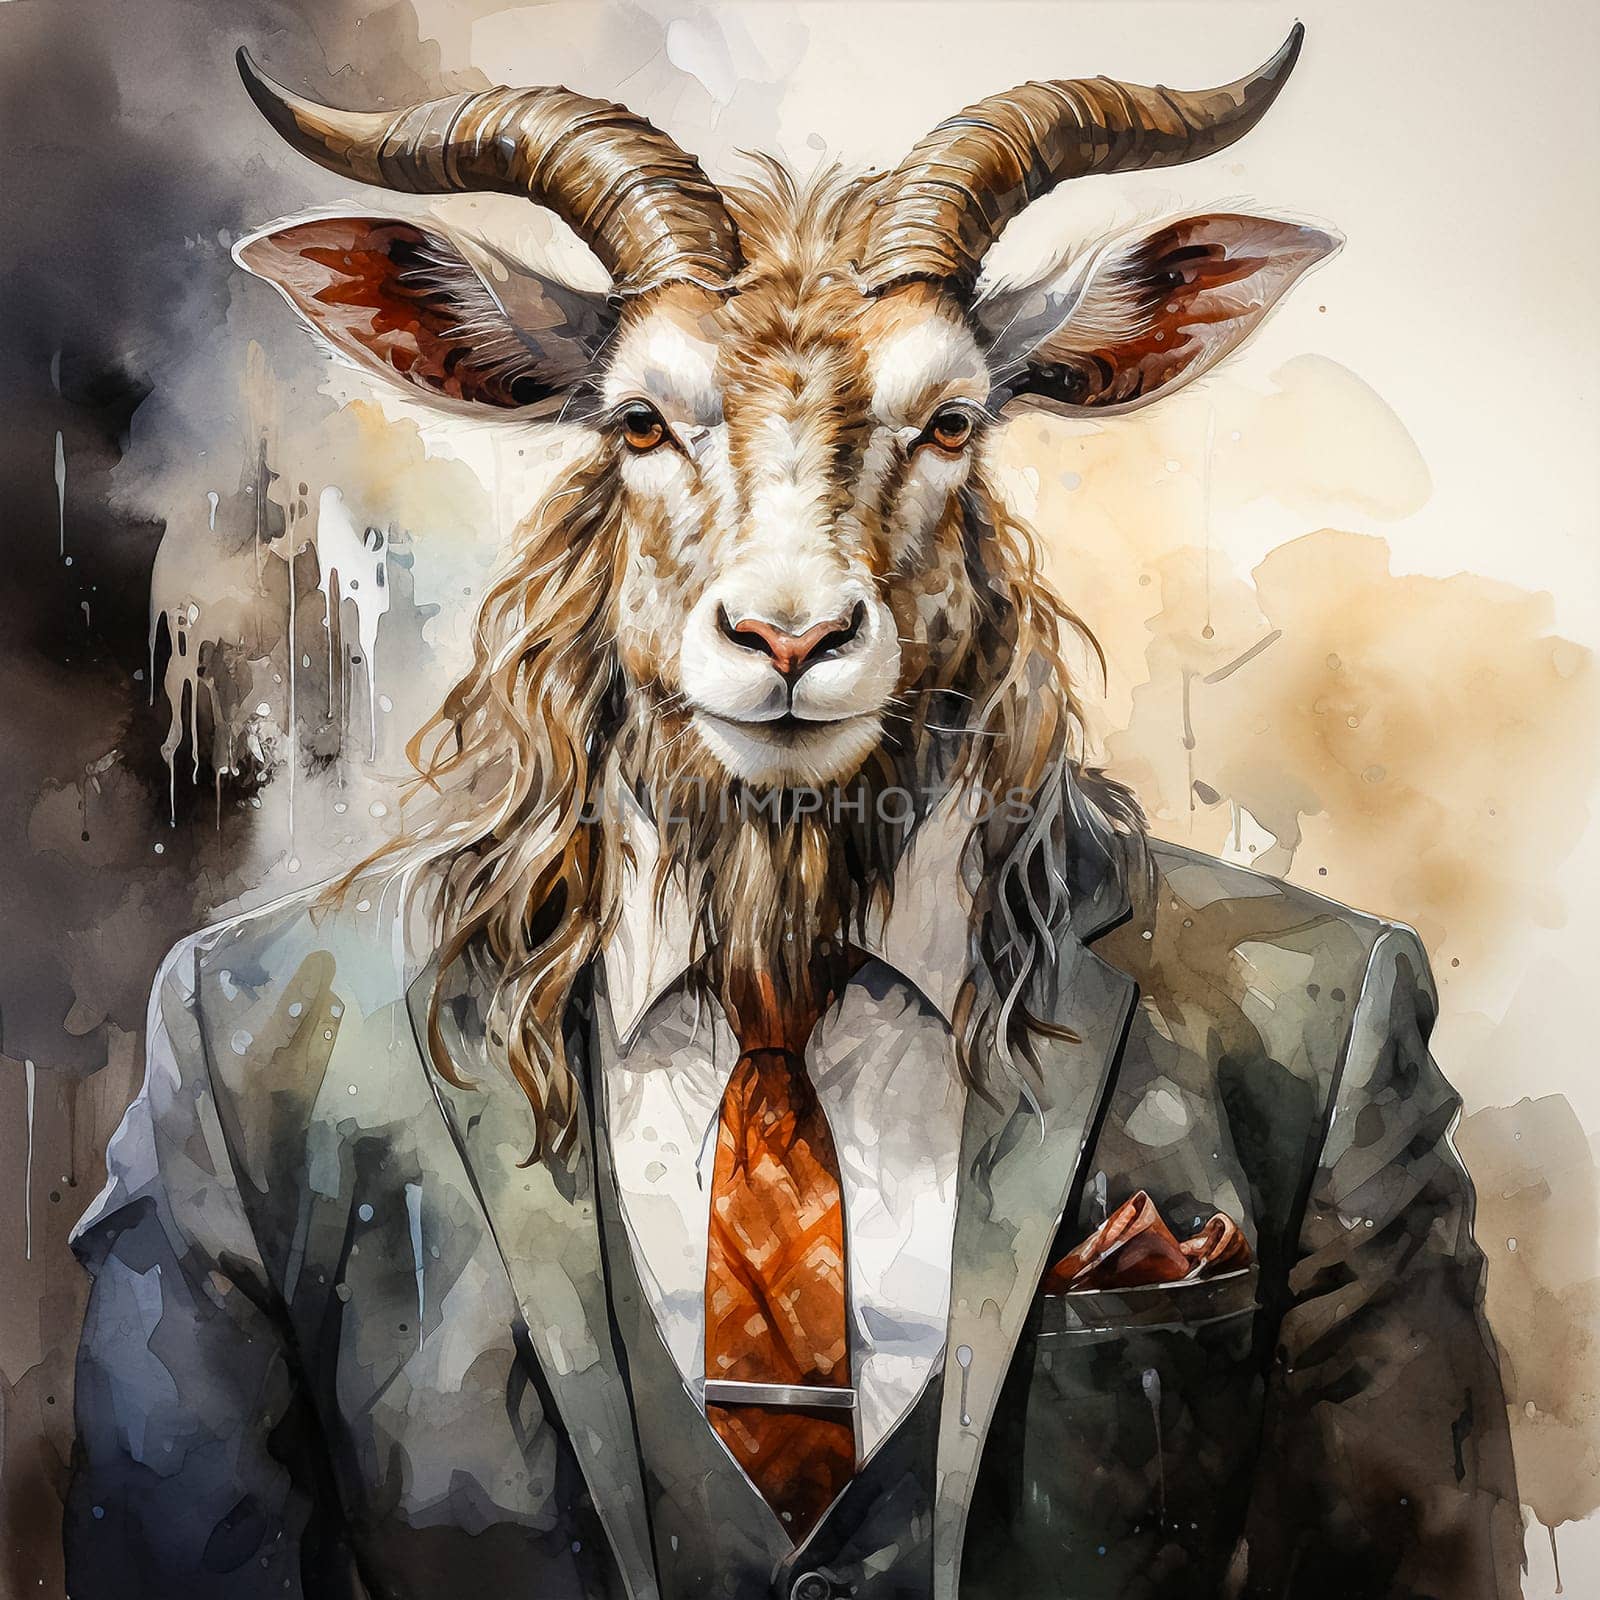 Business watercolors of a racing goat in elegant suits by Alla_Morozova93